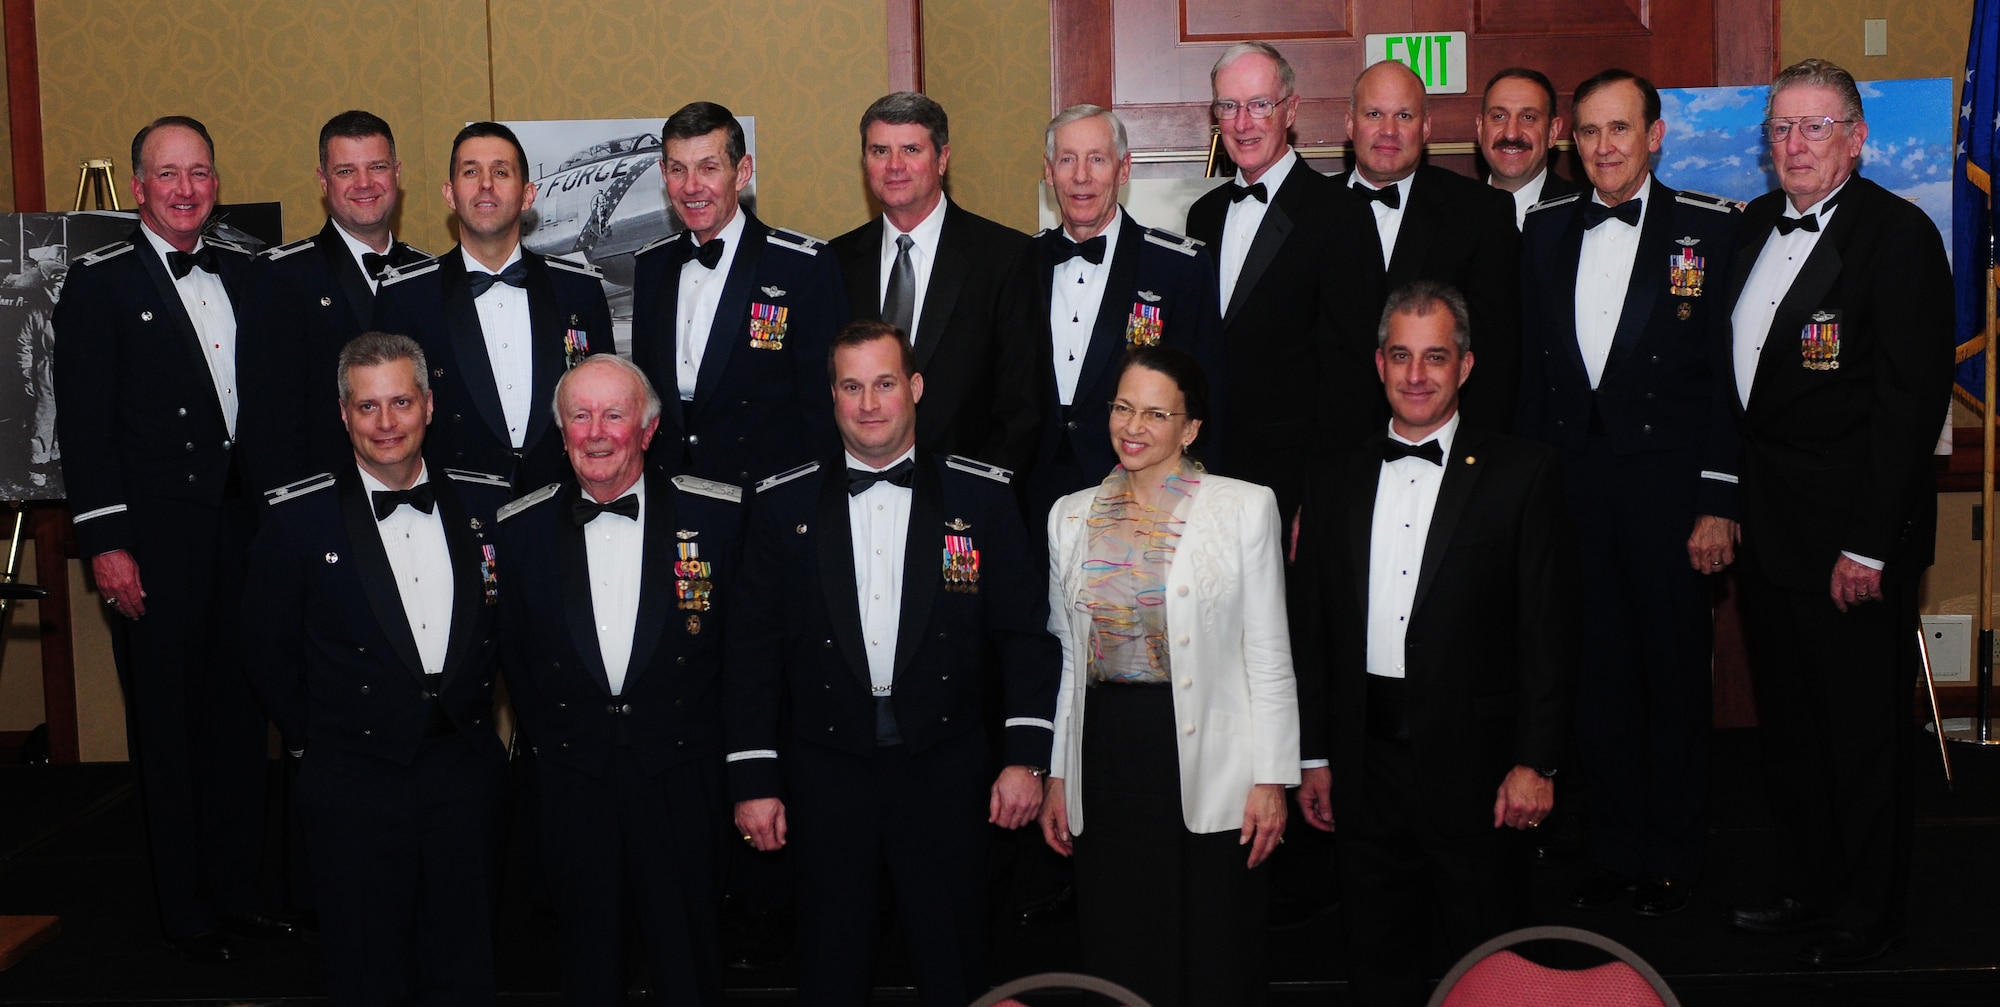 Col. Phil Stewart (lower middle), 9th Reconnaissance Wing commander, and 1st Reconnaissance Squadron past and present commanders pose for a photo during the 1st RS Centennial Celebration at the Sheraton Grand Hotel in Sacramento, Calif., March 9, 2013. Photos were on display showing the evolution of the squadron throughout the last 100 years. (U.S. Air Force photo by Senior Airman Allen Pollard/Released)